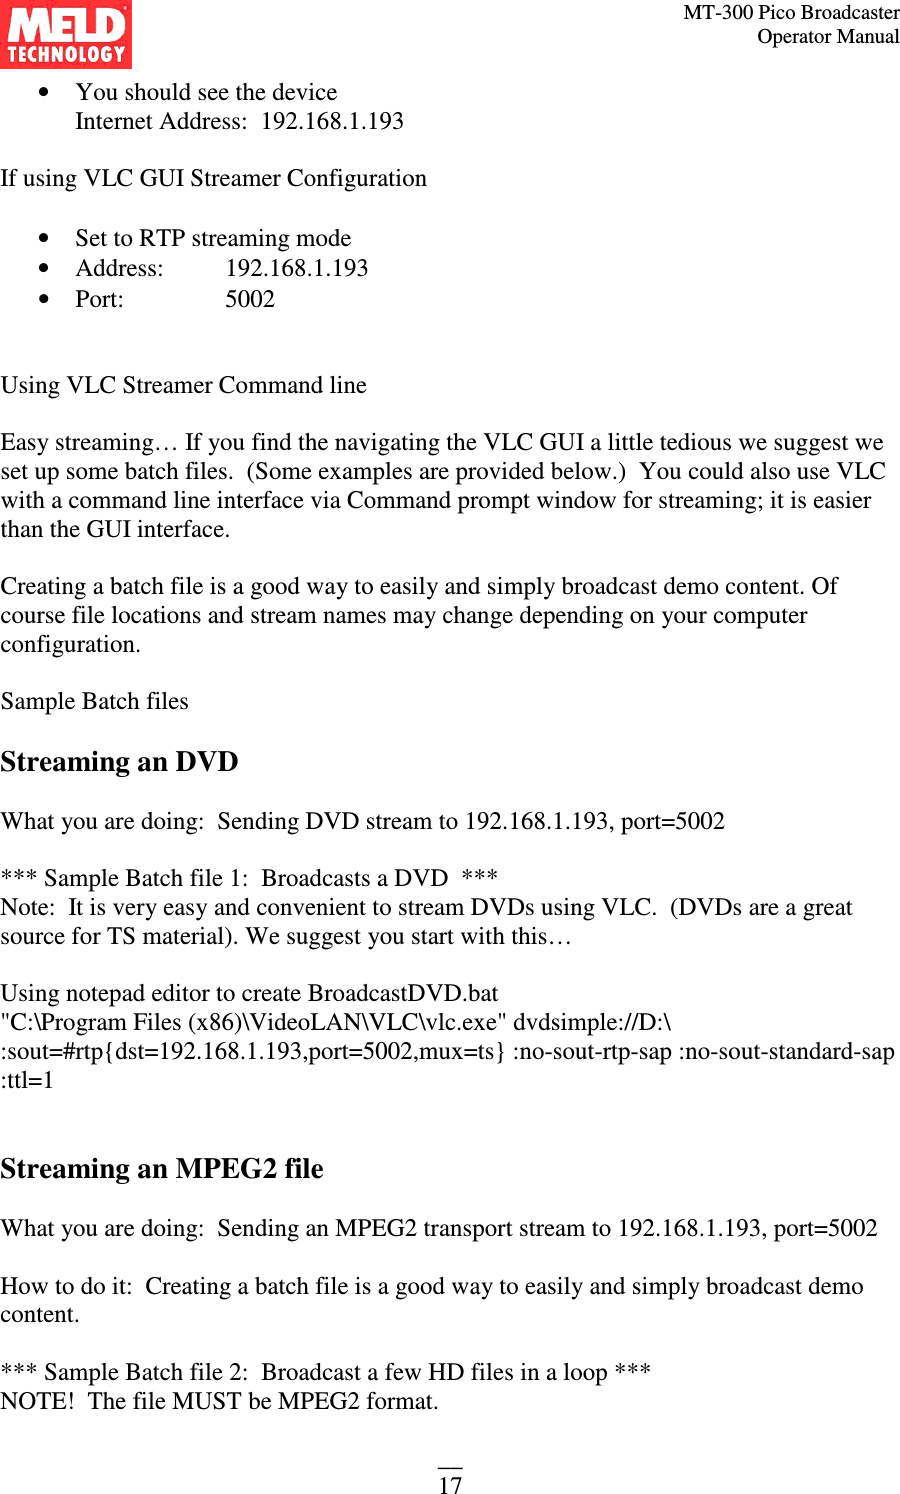 MT-300 Pico Broadcaster                                                                                                                                             Operator Manual __ 17 • You should see the device  Internet Address:  192.168.1.193  If using VLC GUI Streamer Configuration  • Set to RTP streaming mode • Address:   192.168.1.193 • Port:    5002   Using VLC Streamer Command line  Easy streaming… If you find the navigating the VLC GUI a little tedious we suggest we set up some batch files.  (Some examples are provided below.)  You could also use VLC with a command line interface via Command prompt window for streaming; it is easier than the GUI interface.  Creating a batch file is a good way to easily and simply broadcast demo content. Of course file locations and stream names may change depending on your computer configuration.  Sample Batch files  Streaming an DVD  What you are doing:  Sending DVD stream to 192.168.1.193, port=5002  *** Sample Batch file 1:  Broadcasts a DVD  *** Note:  It is very easy and convenient to stream DVDs using VLC.  (DVDs are a great source for TS material). We suggest you start with this…  Using notepad editor to create BroadcastDVD.bat &quot;C:\Program Files (x86)\VideoLAN\VLC\vlc.exe&quot; dvdsimple://D:\ :sout=#rtp{dst=192.168.1.193,port=5002,mux=ts} :no-sout-rtp-sap :no-sout-standard-sap :ttl=1   Streaming an MPEG2 file  What you are doing:  Sending an MPEG2 transport stream to 192.168.1.193, port=5002  How to do it:  Creating a batch file is a good way to easily and simply broadcast demo content.  *** Sample Batch file 2:  Broadcast a few HD files in a loop ***  NOTE!  The file MUST be MPEG2 format.   